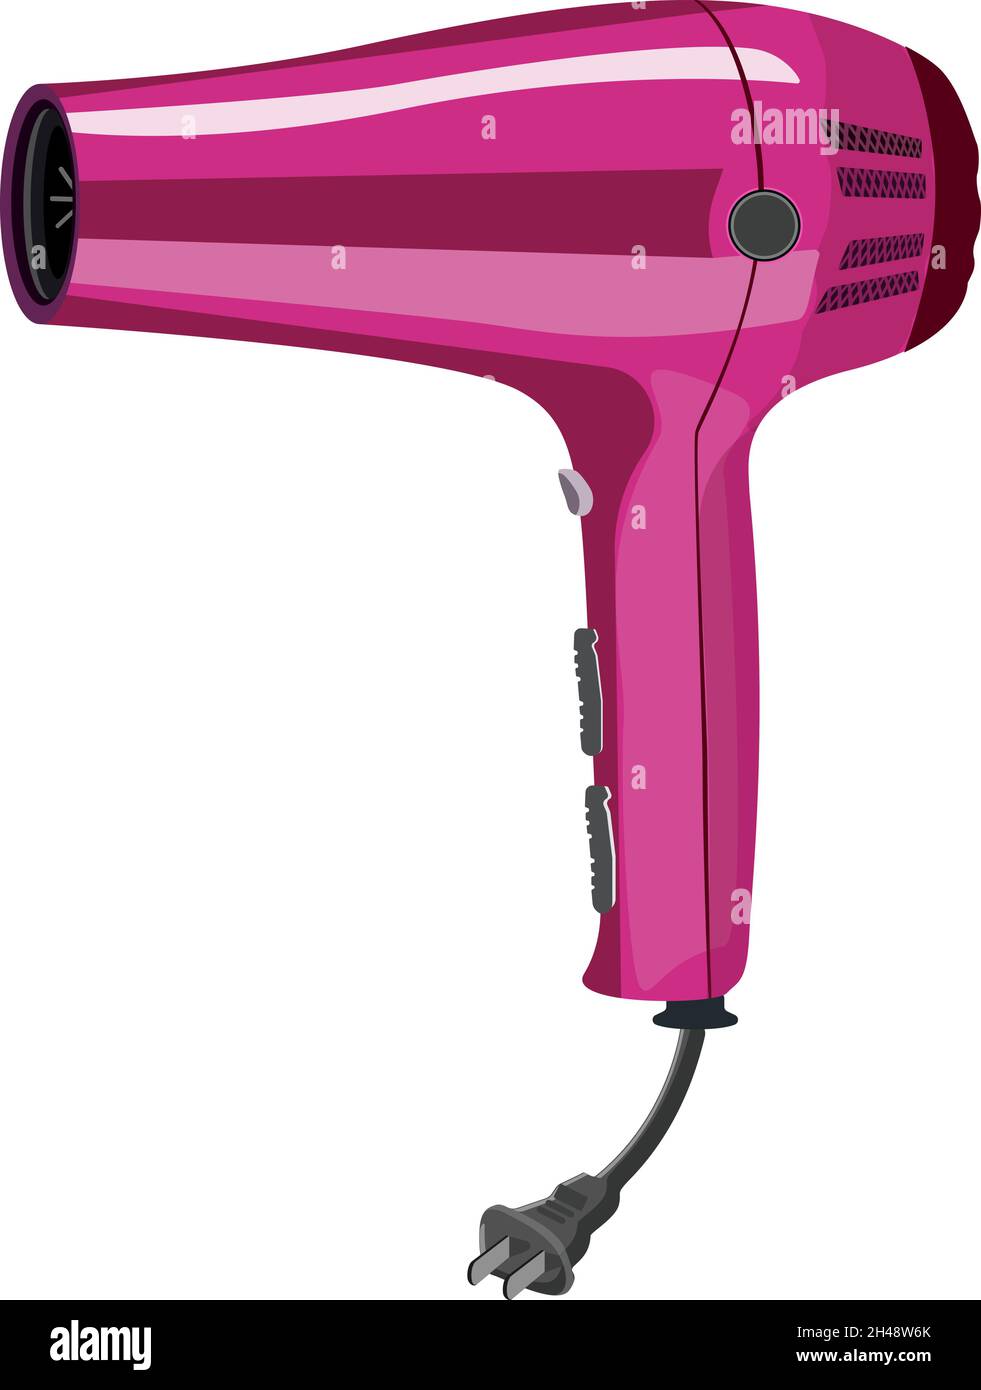 Buy GUBB GB163 3 Setting Hair Dryer Overheat Protection TG000502 Pink  Online  Croma